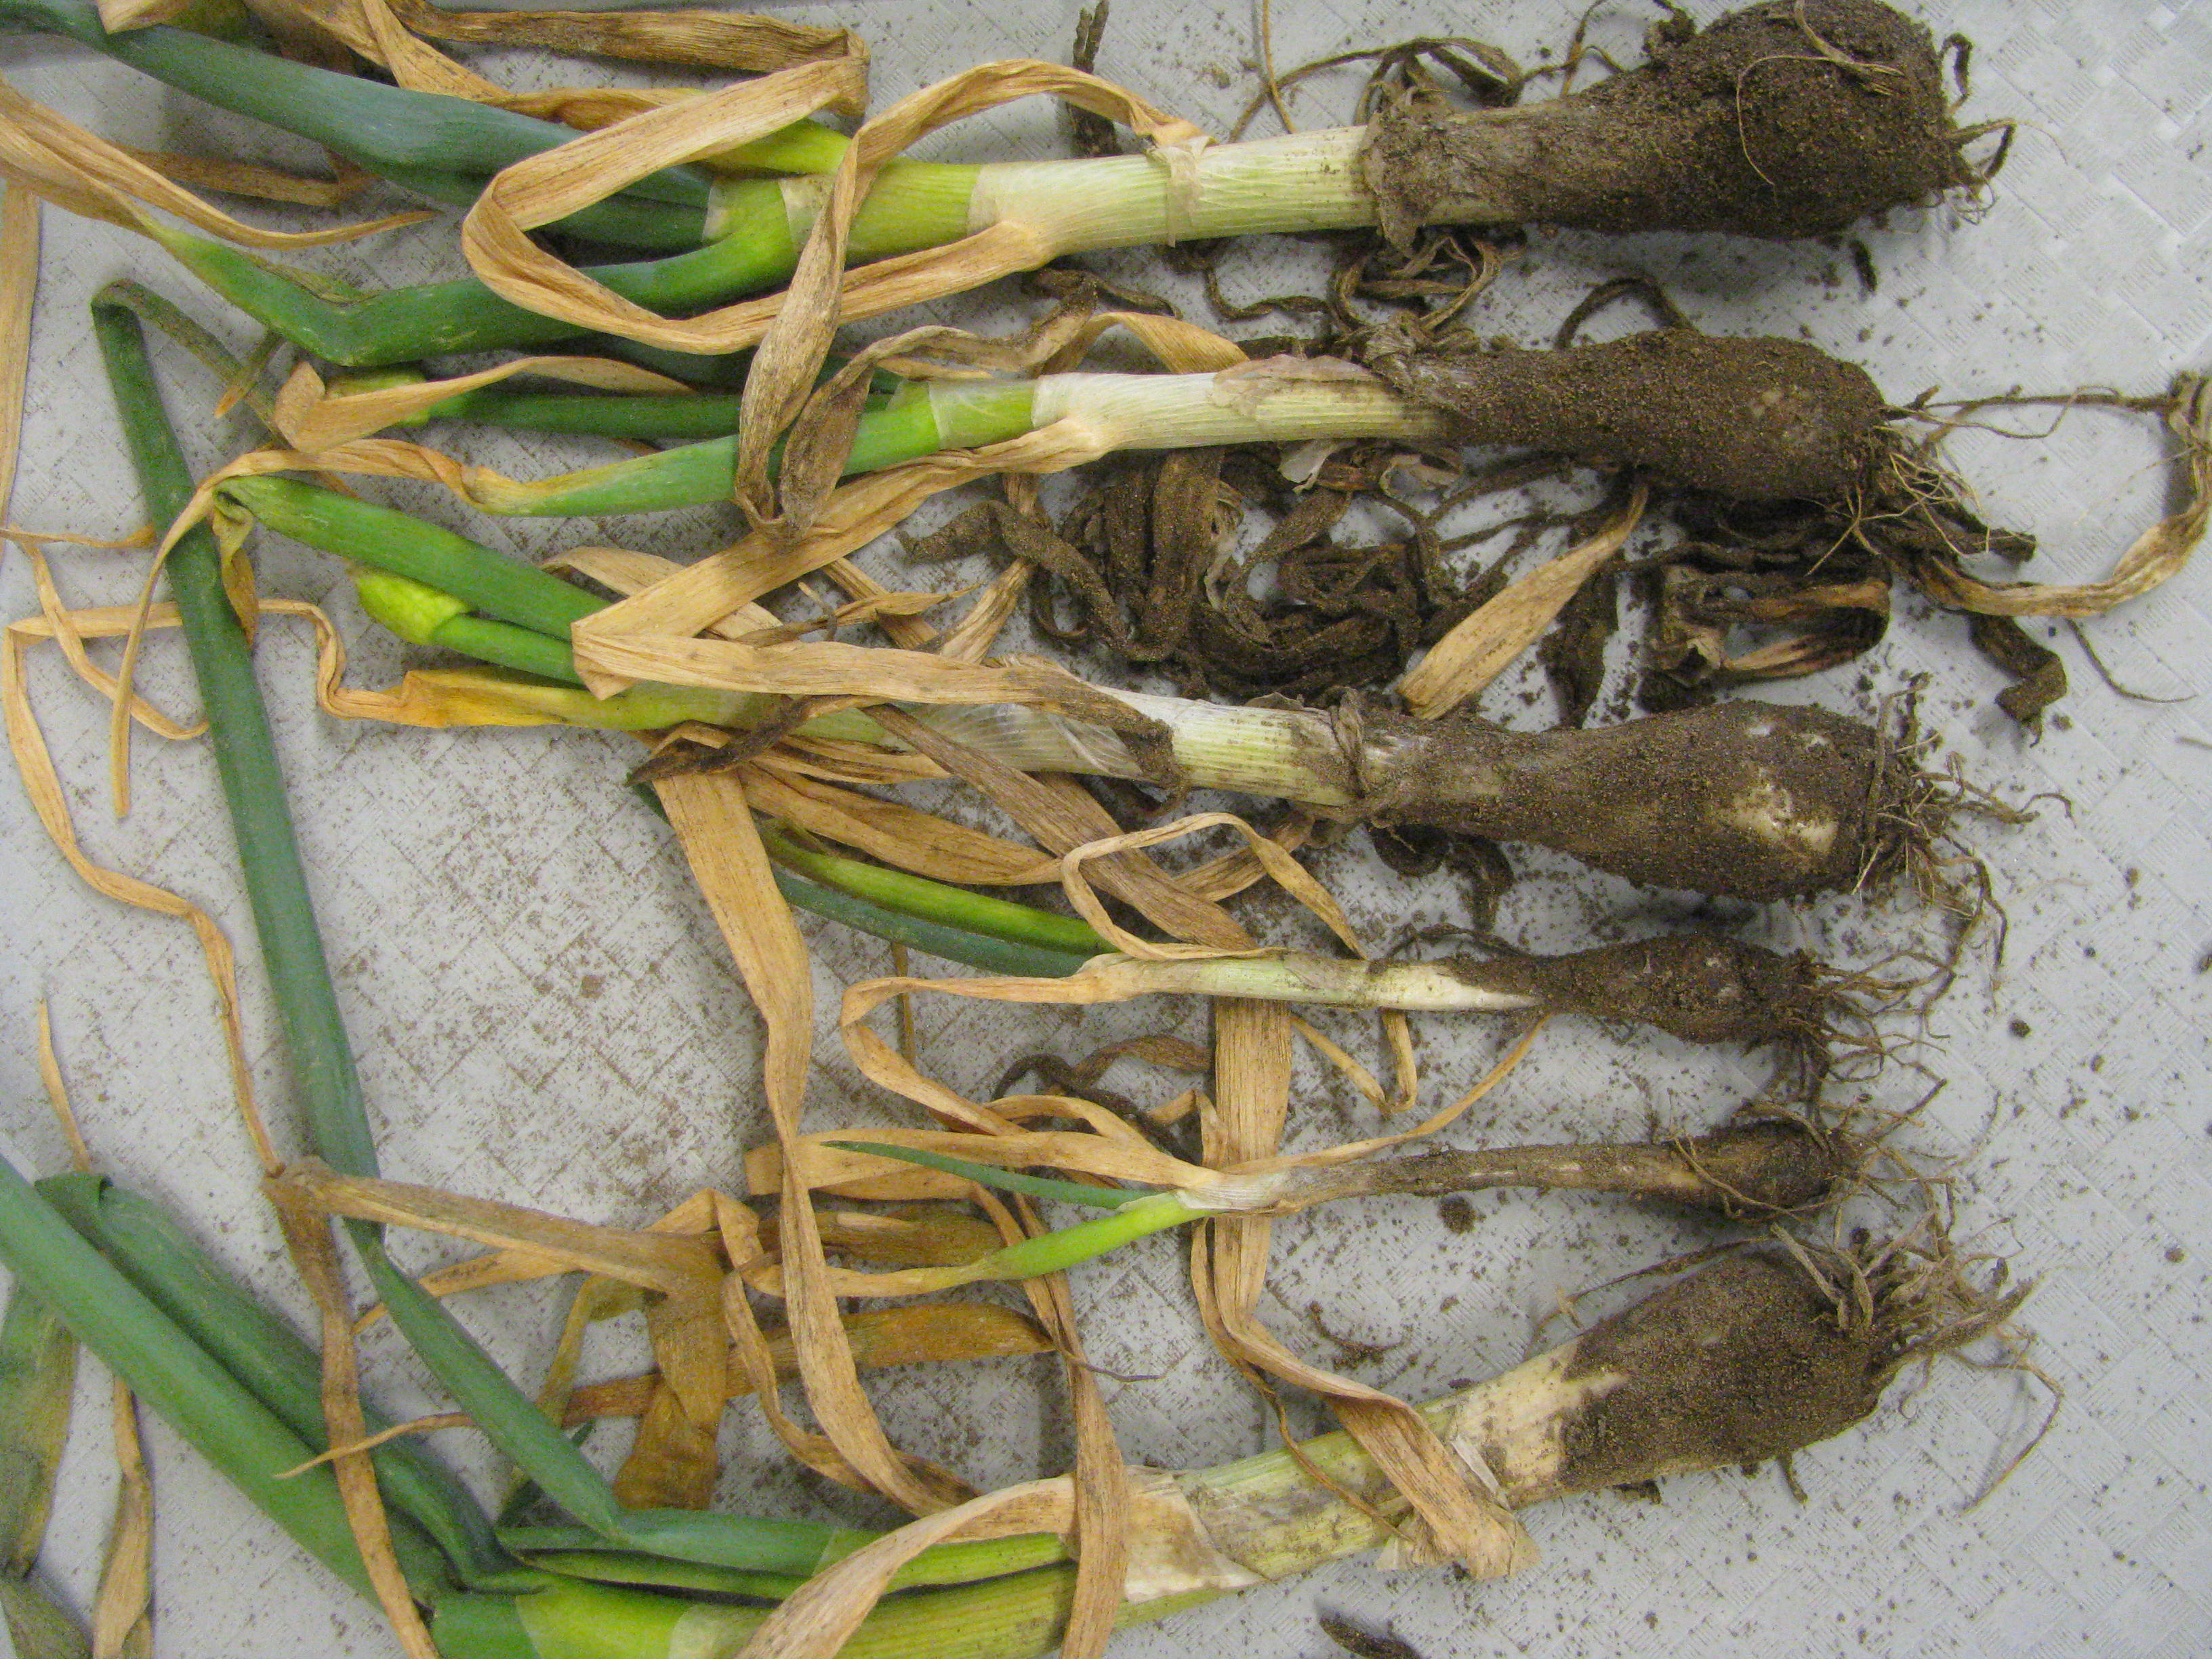 Symptoms of white mold on plants from an onion seed crop   include stunting, leaf chlorosis and dieback, and soil adhering to mycelium of the pathogen, <em>Sclerotium cepivorum</em>, on the bulbs and necks. 